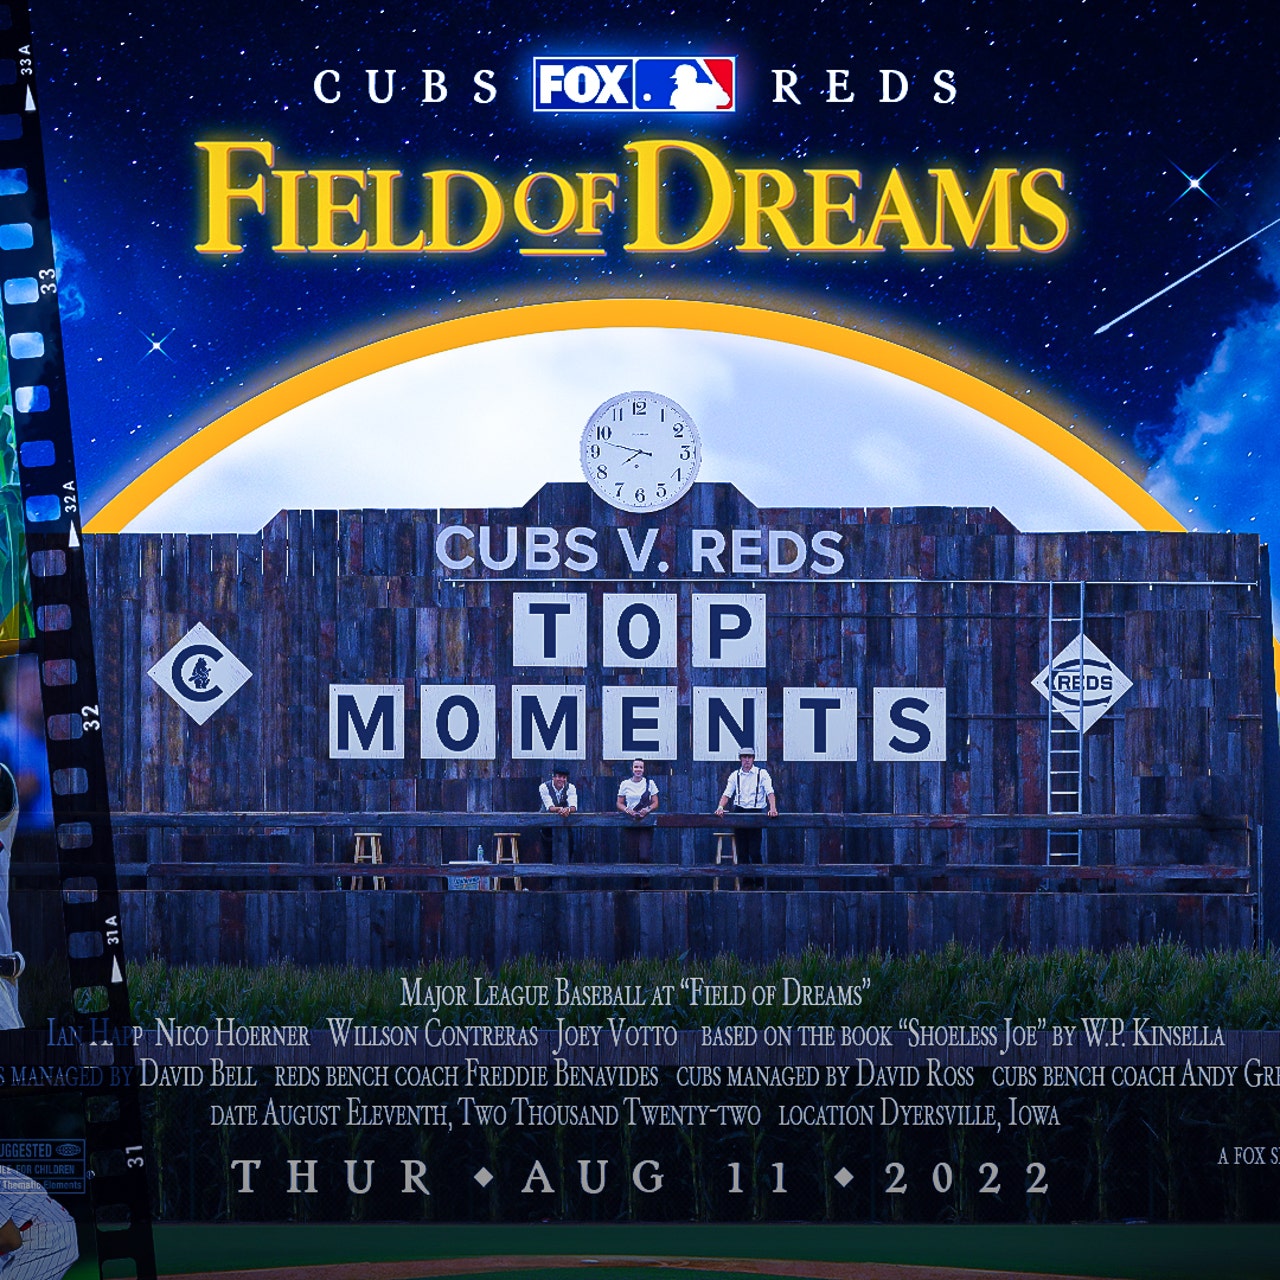 Cubs beat Reds at 2022 Field of Dreams Game